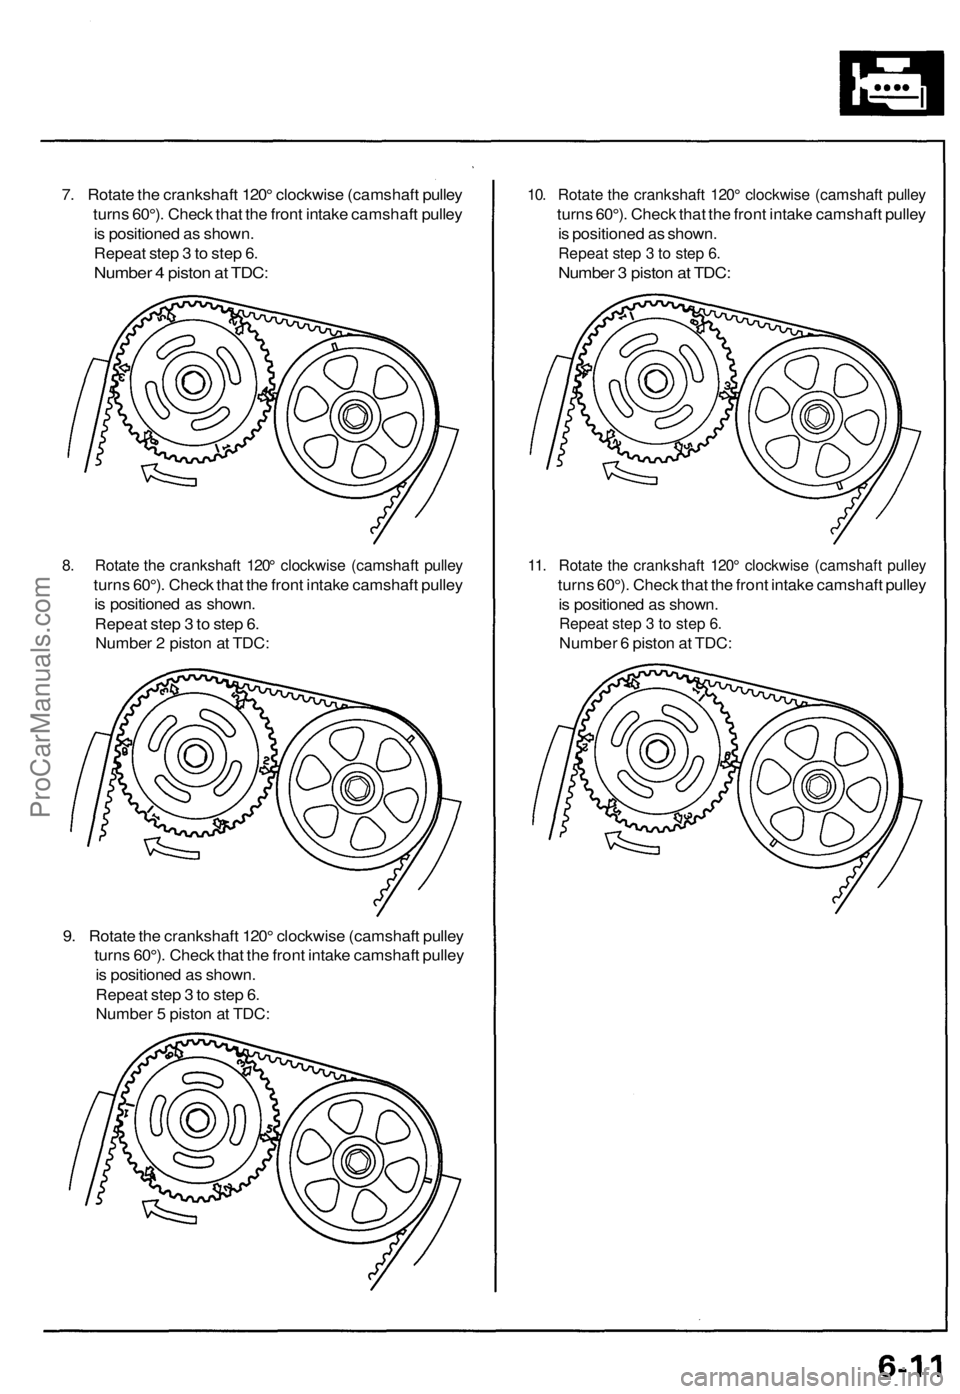 ACURA NSX 1991  Service Repair Manual 
7. Rotate the crankshaft 120° clockwise (camshaft pulley

turns 60°). Check that the front intake camshaft pulley

is positioned as shown.

Repeat step 3 to step 6.

Number 4 piston at TDC:

8. Rot